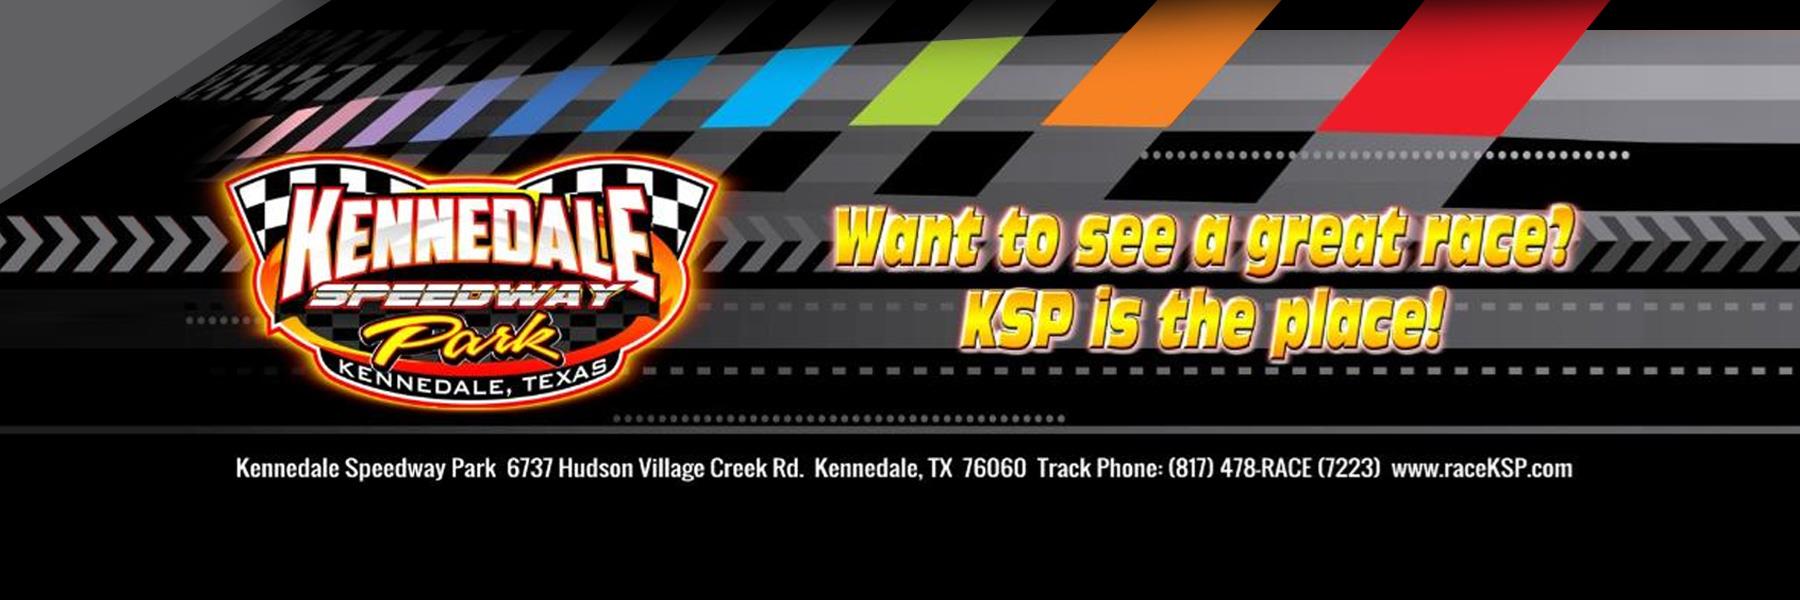 9/17/2022 - Kennedale Speedway Park